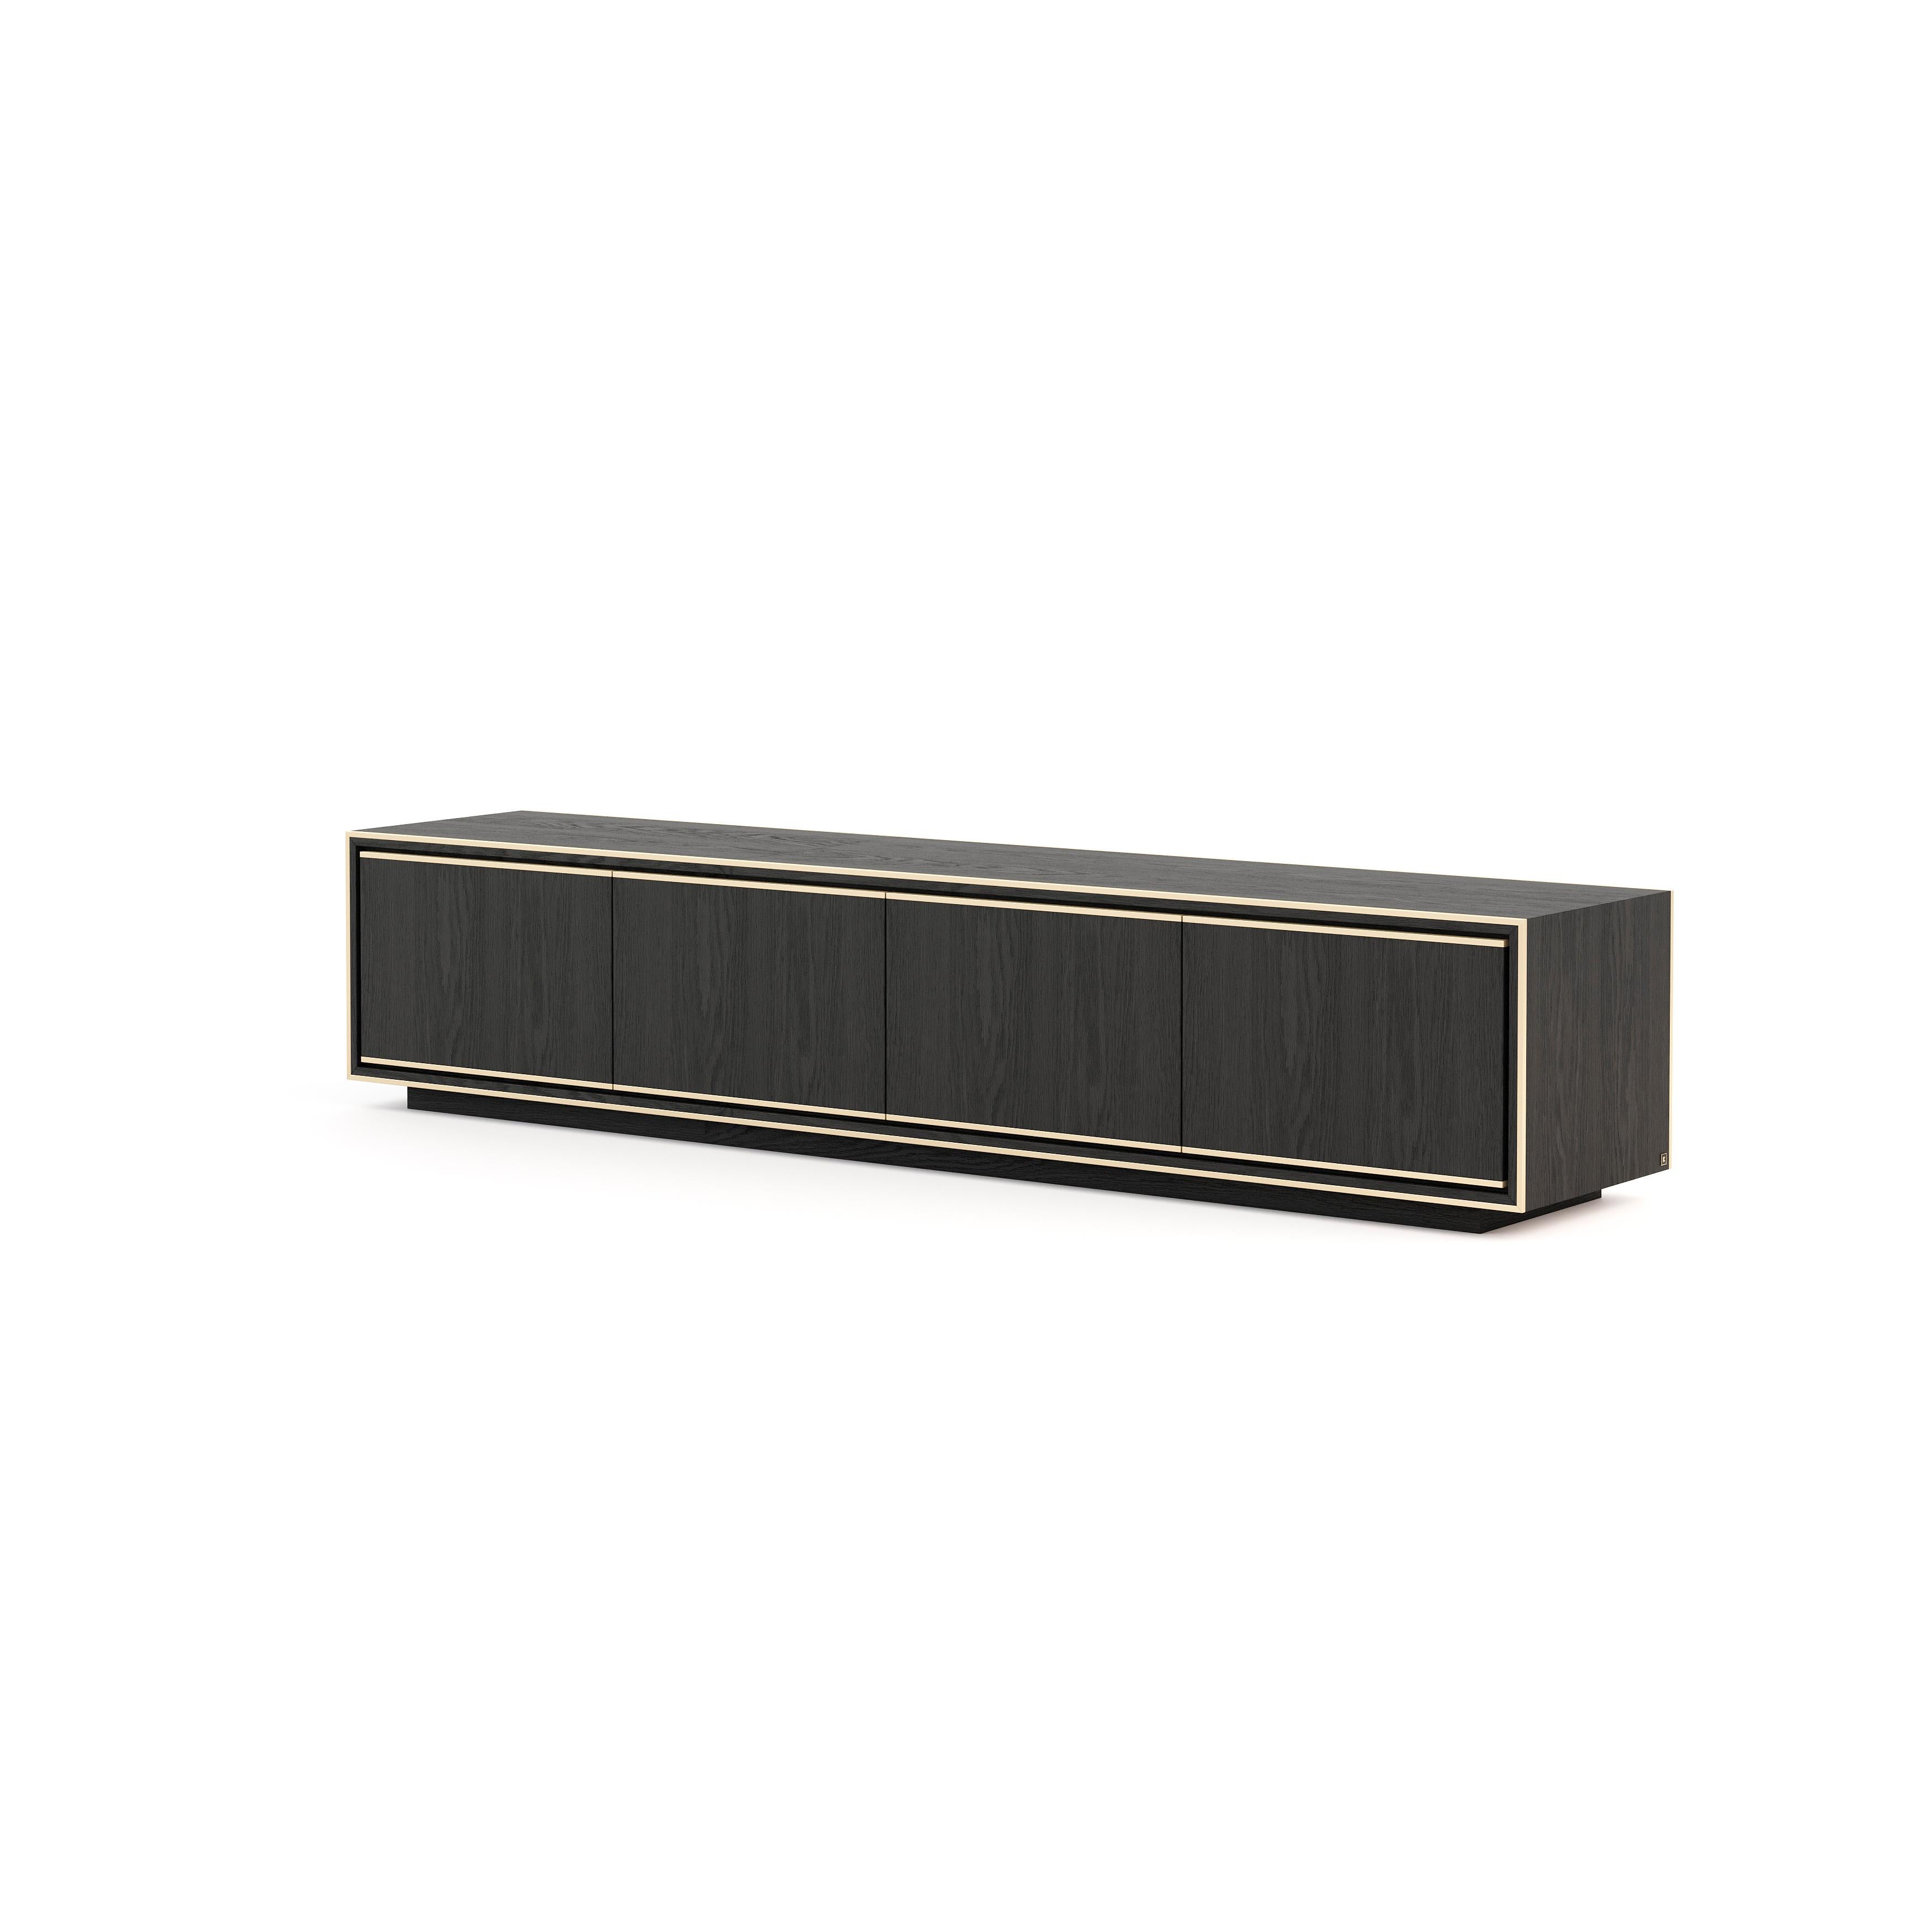 Rick TV cabinet is somewhere between functionality and beauty, modern and classic. This cabinet storage with a set of four doors and metallic details can be customized. A versatile piece for contemporary living rooms or master bedrooms.

*